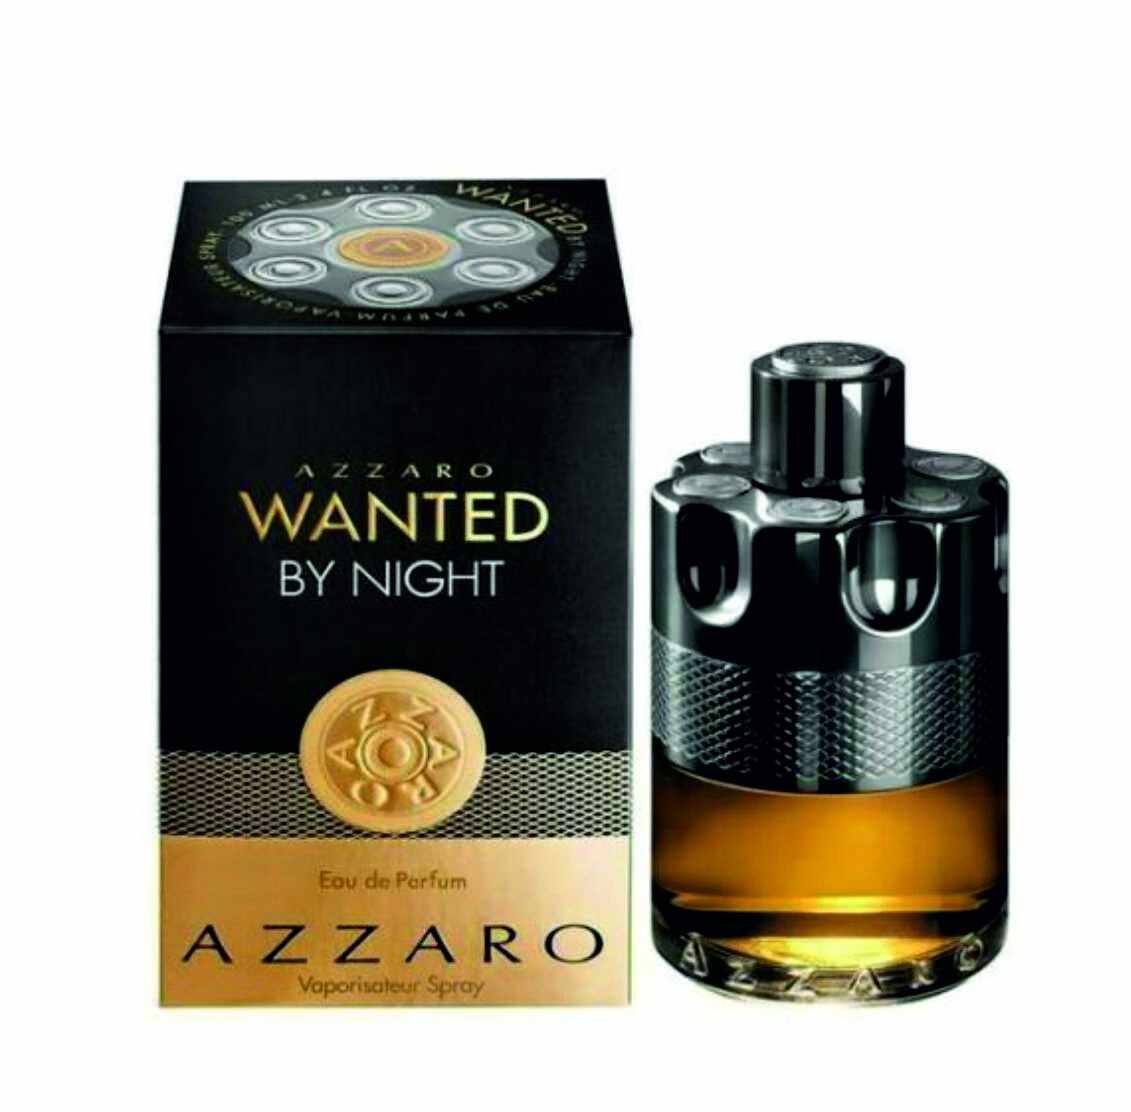 WANTED BY NIGHT 50 ml